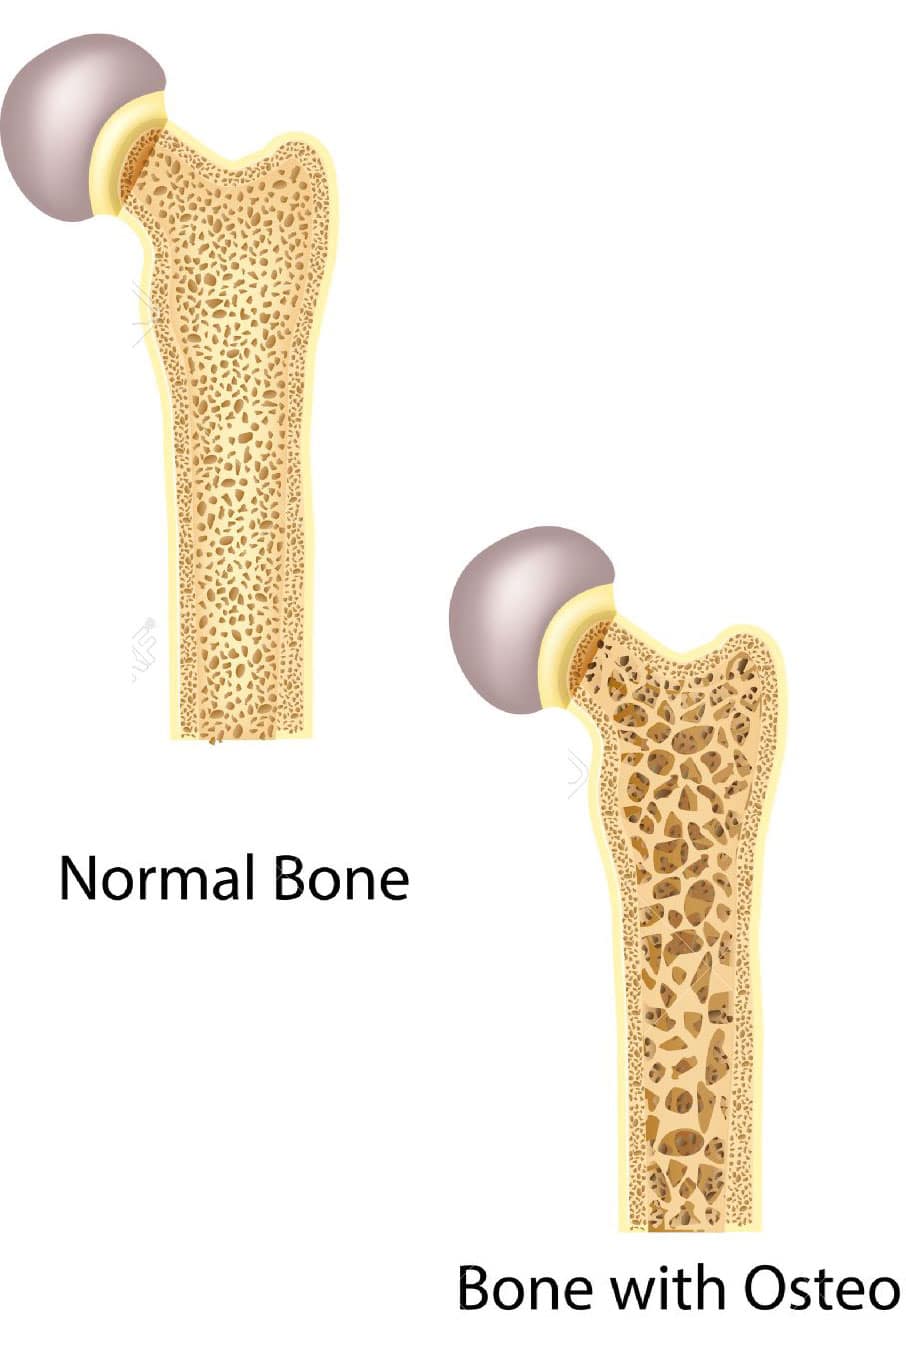 Bone of hip normal bone and bone with osteoporosis